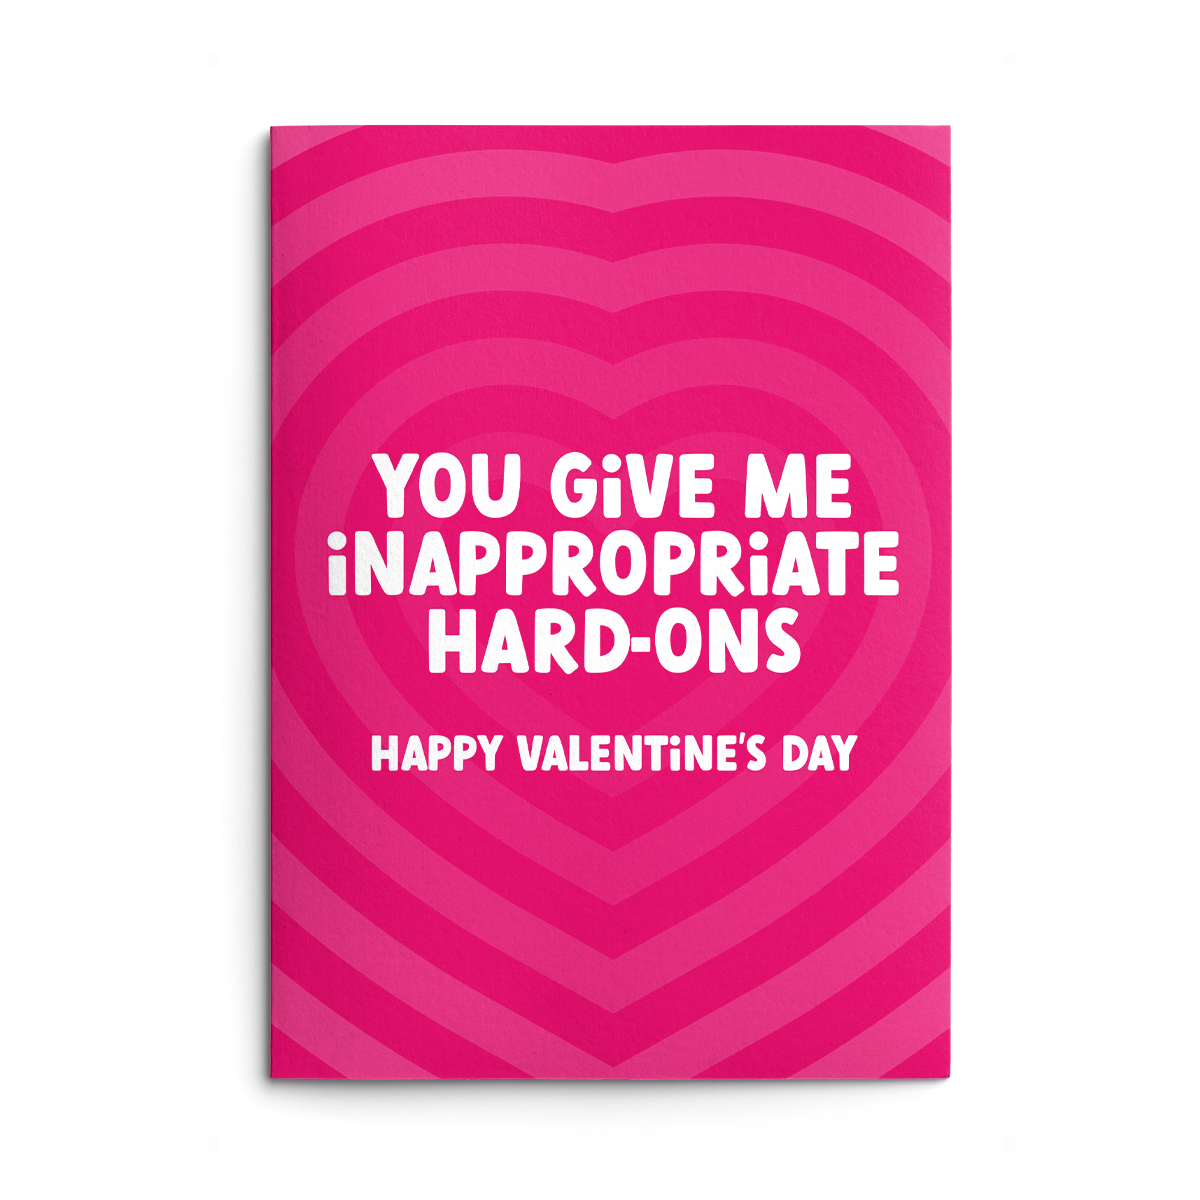 Inappropriate Hard-ons Rude Valentines Card